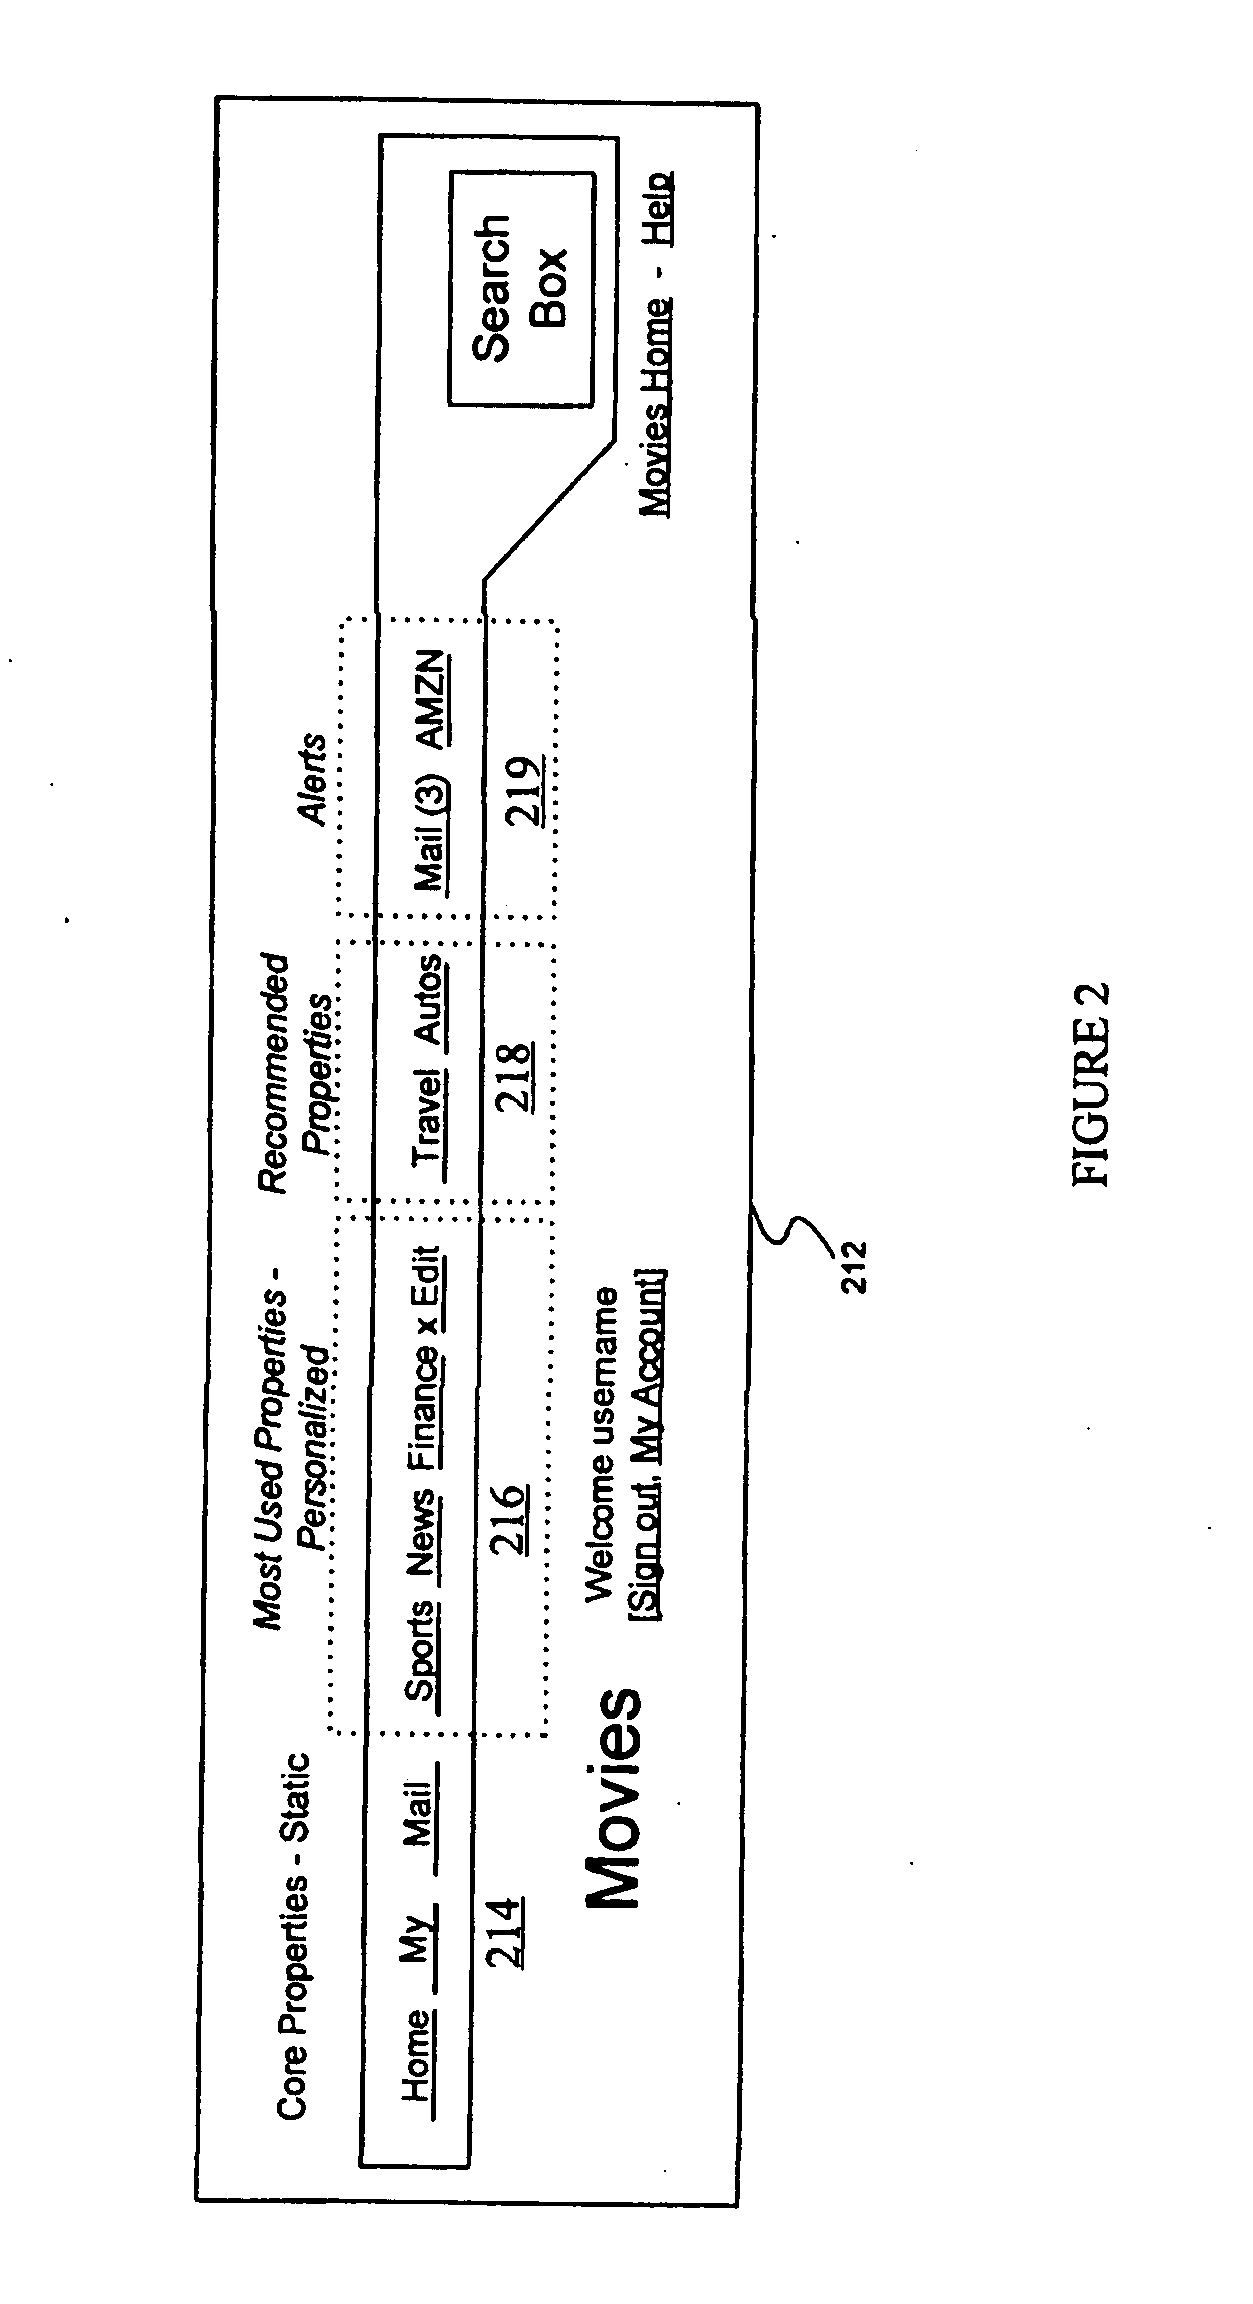 Method and apparatus for adaptive personalization of navigation